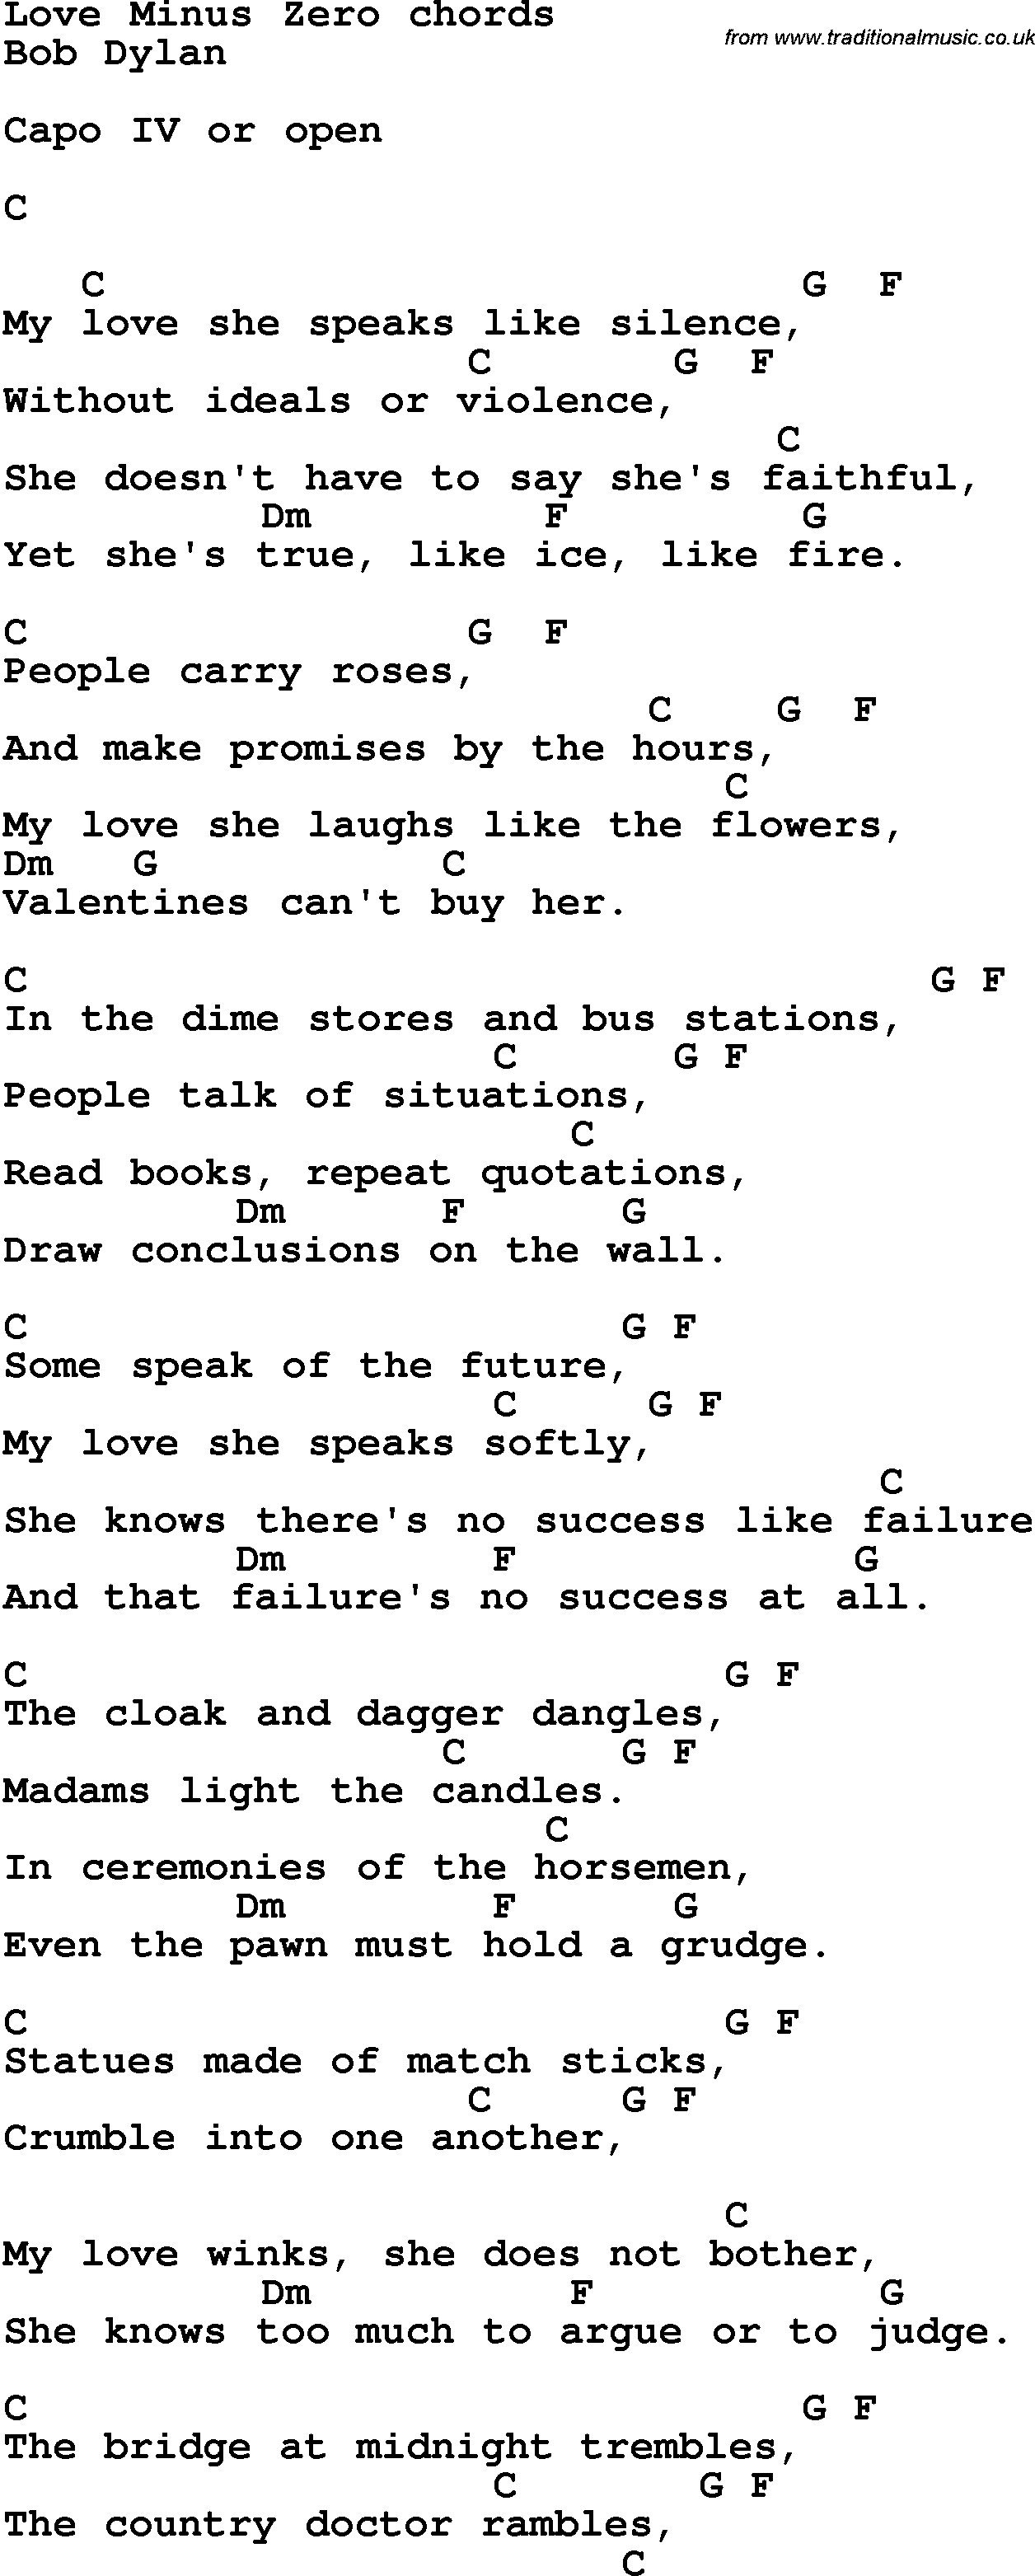 Song Lyrics with guitar chords for Love Minus Zero